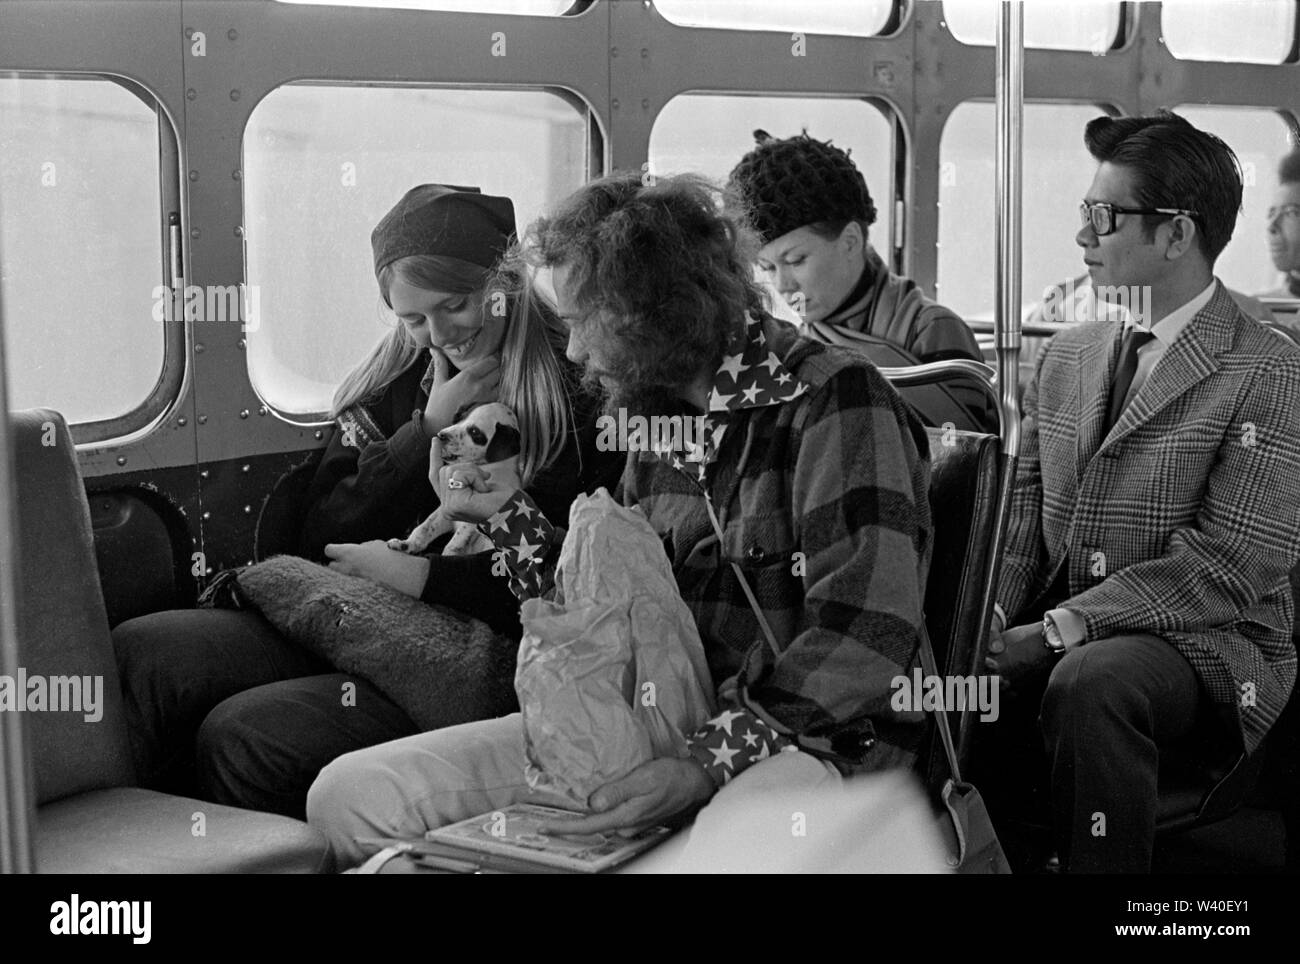 Hippy hippies American couple with pet puppy dog riding a bus in Haight-Ashbury San Francisco. 1969 USA 60s 1960s US HOMER SYKES Stock Photo